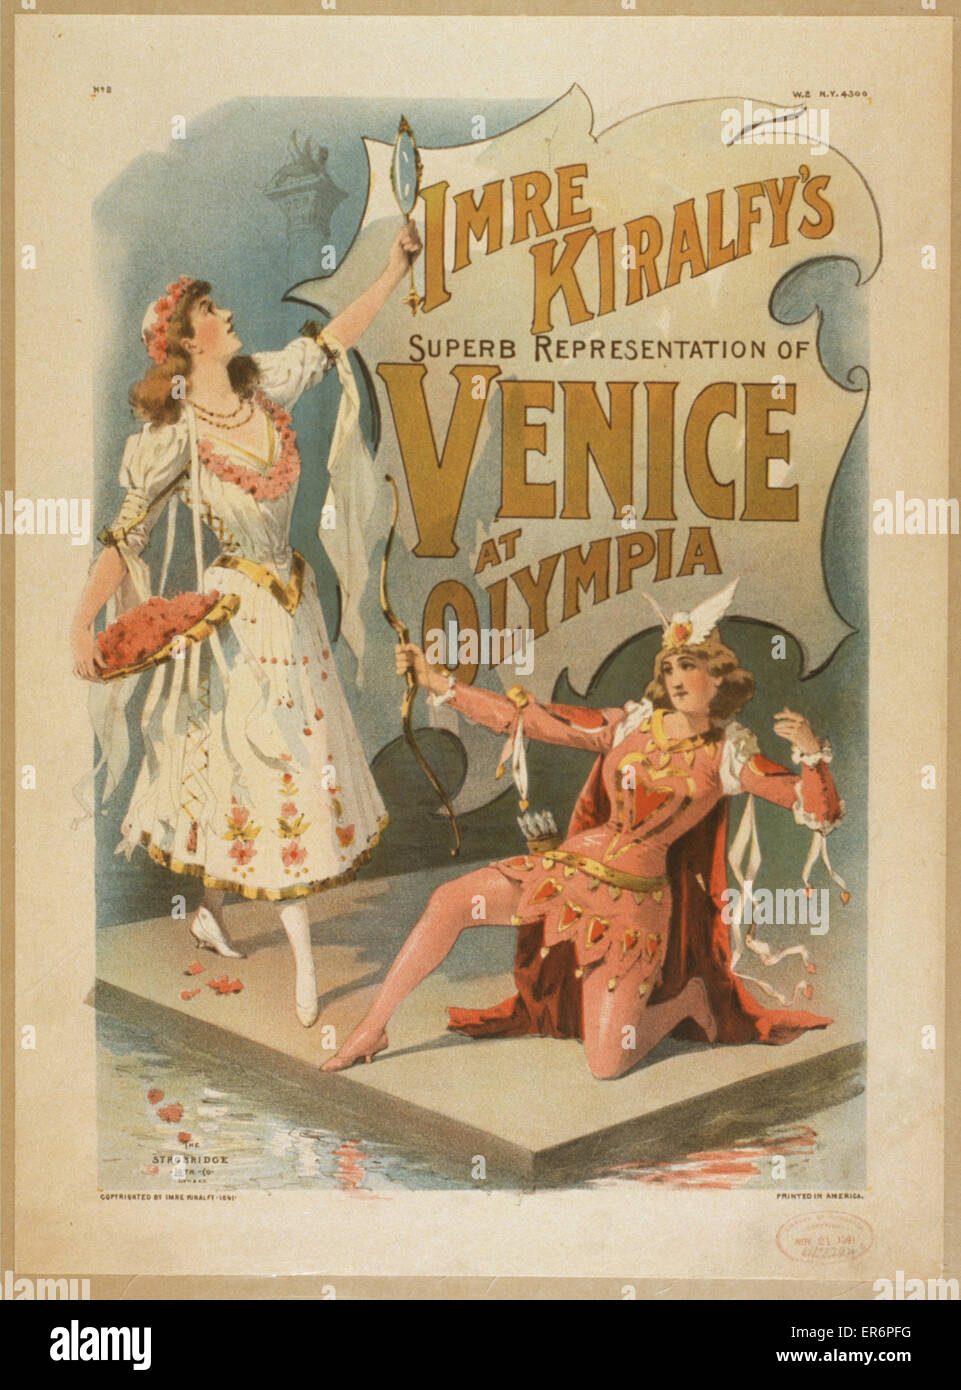 Imre Kiralfy's superb representation of Venice at Olympia. Date c1891. Stock Photo